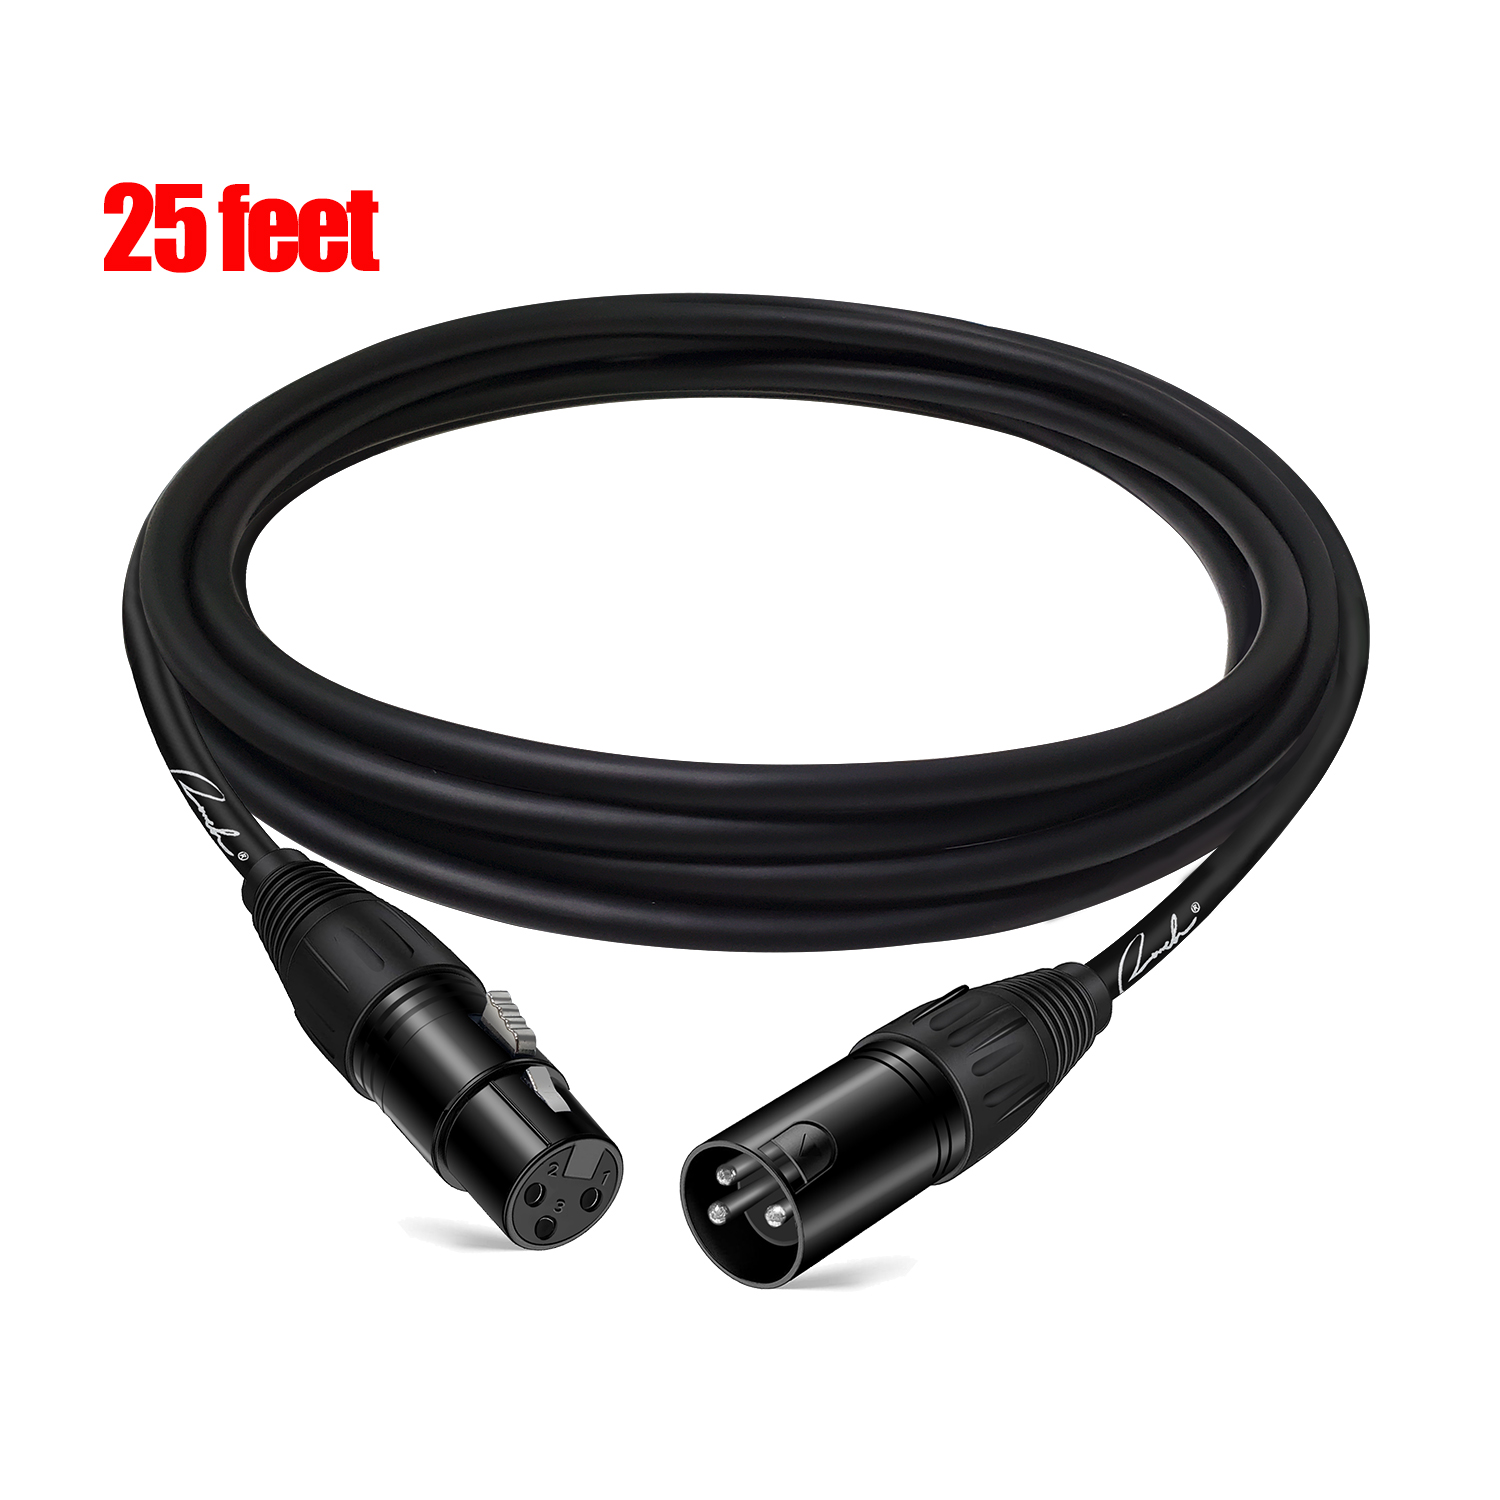 Ranch XLR Microphone Cable 25ft male to Female Balanced 3 Pin XLR Cable - Black